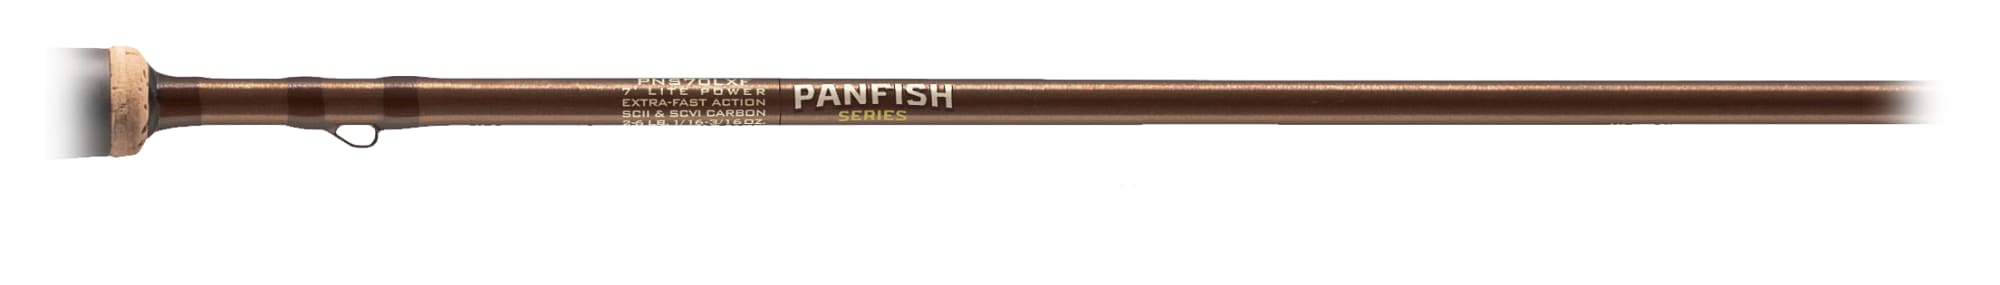 St. Croix Panfish Series Spinning Rod - Hamilton Bait and Tackle